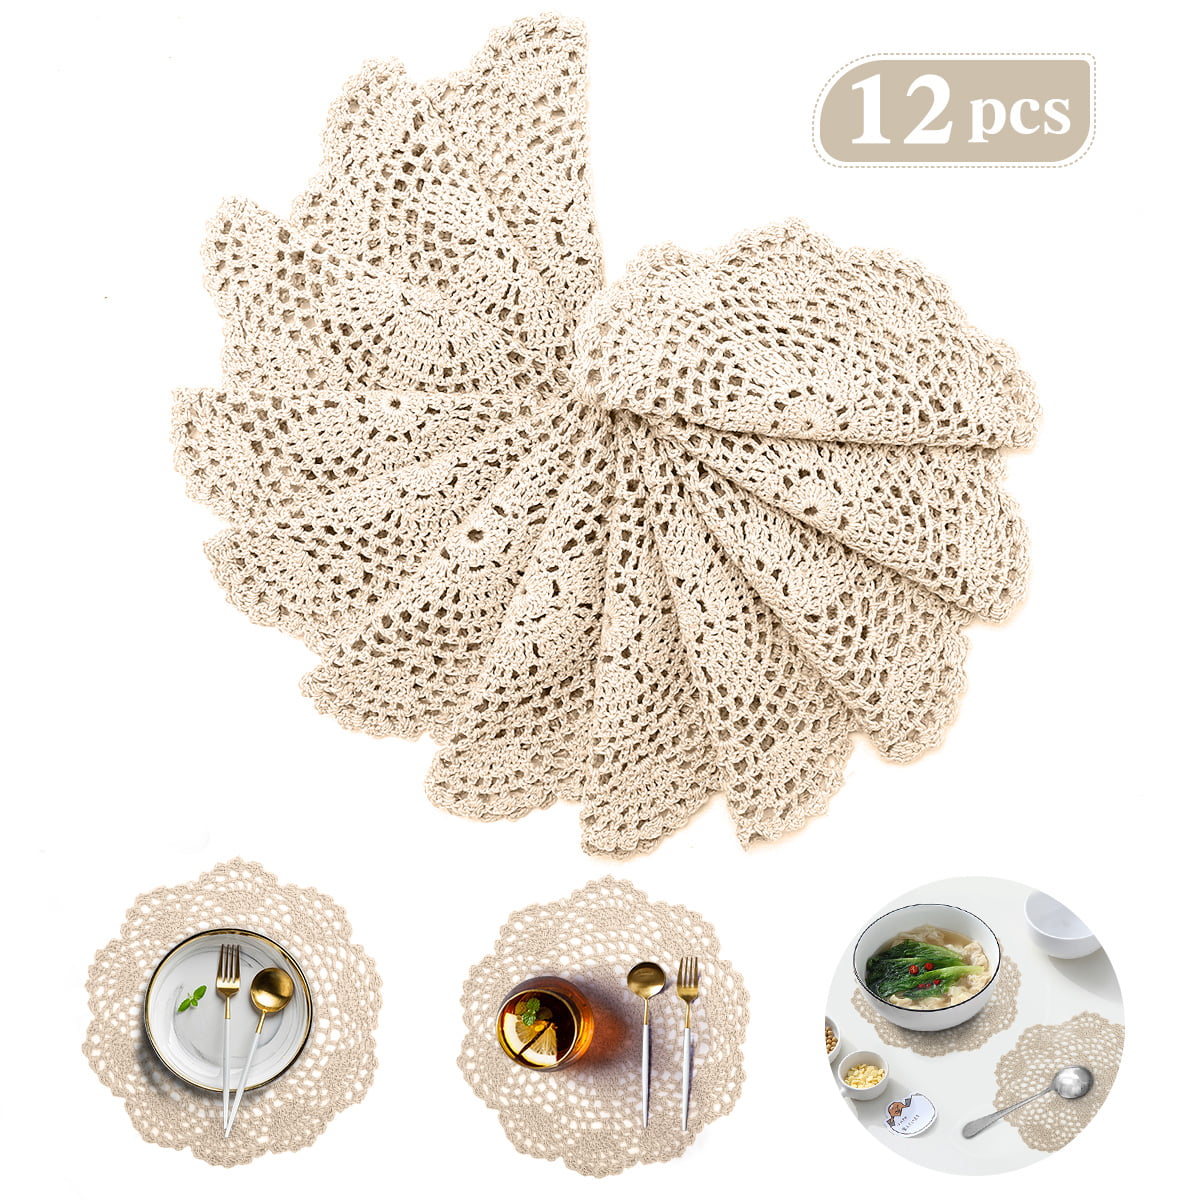 8 Inch Doilies Crochet Round Lace White Handmade Cotton Coasters Pack Of 8 